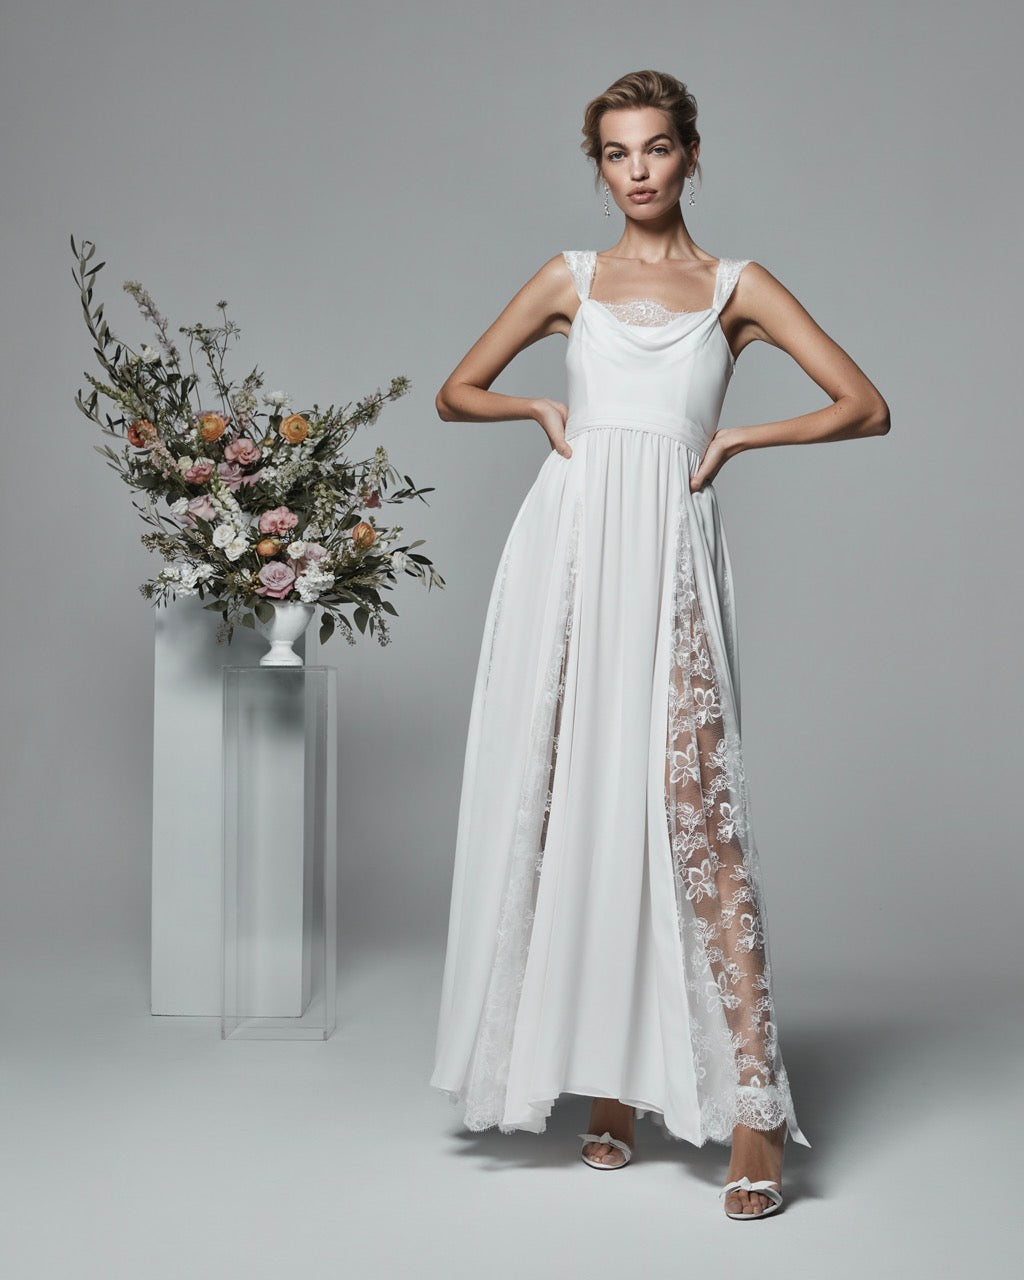 The Ivana Gown